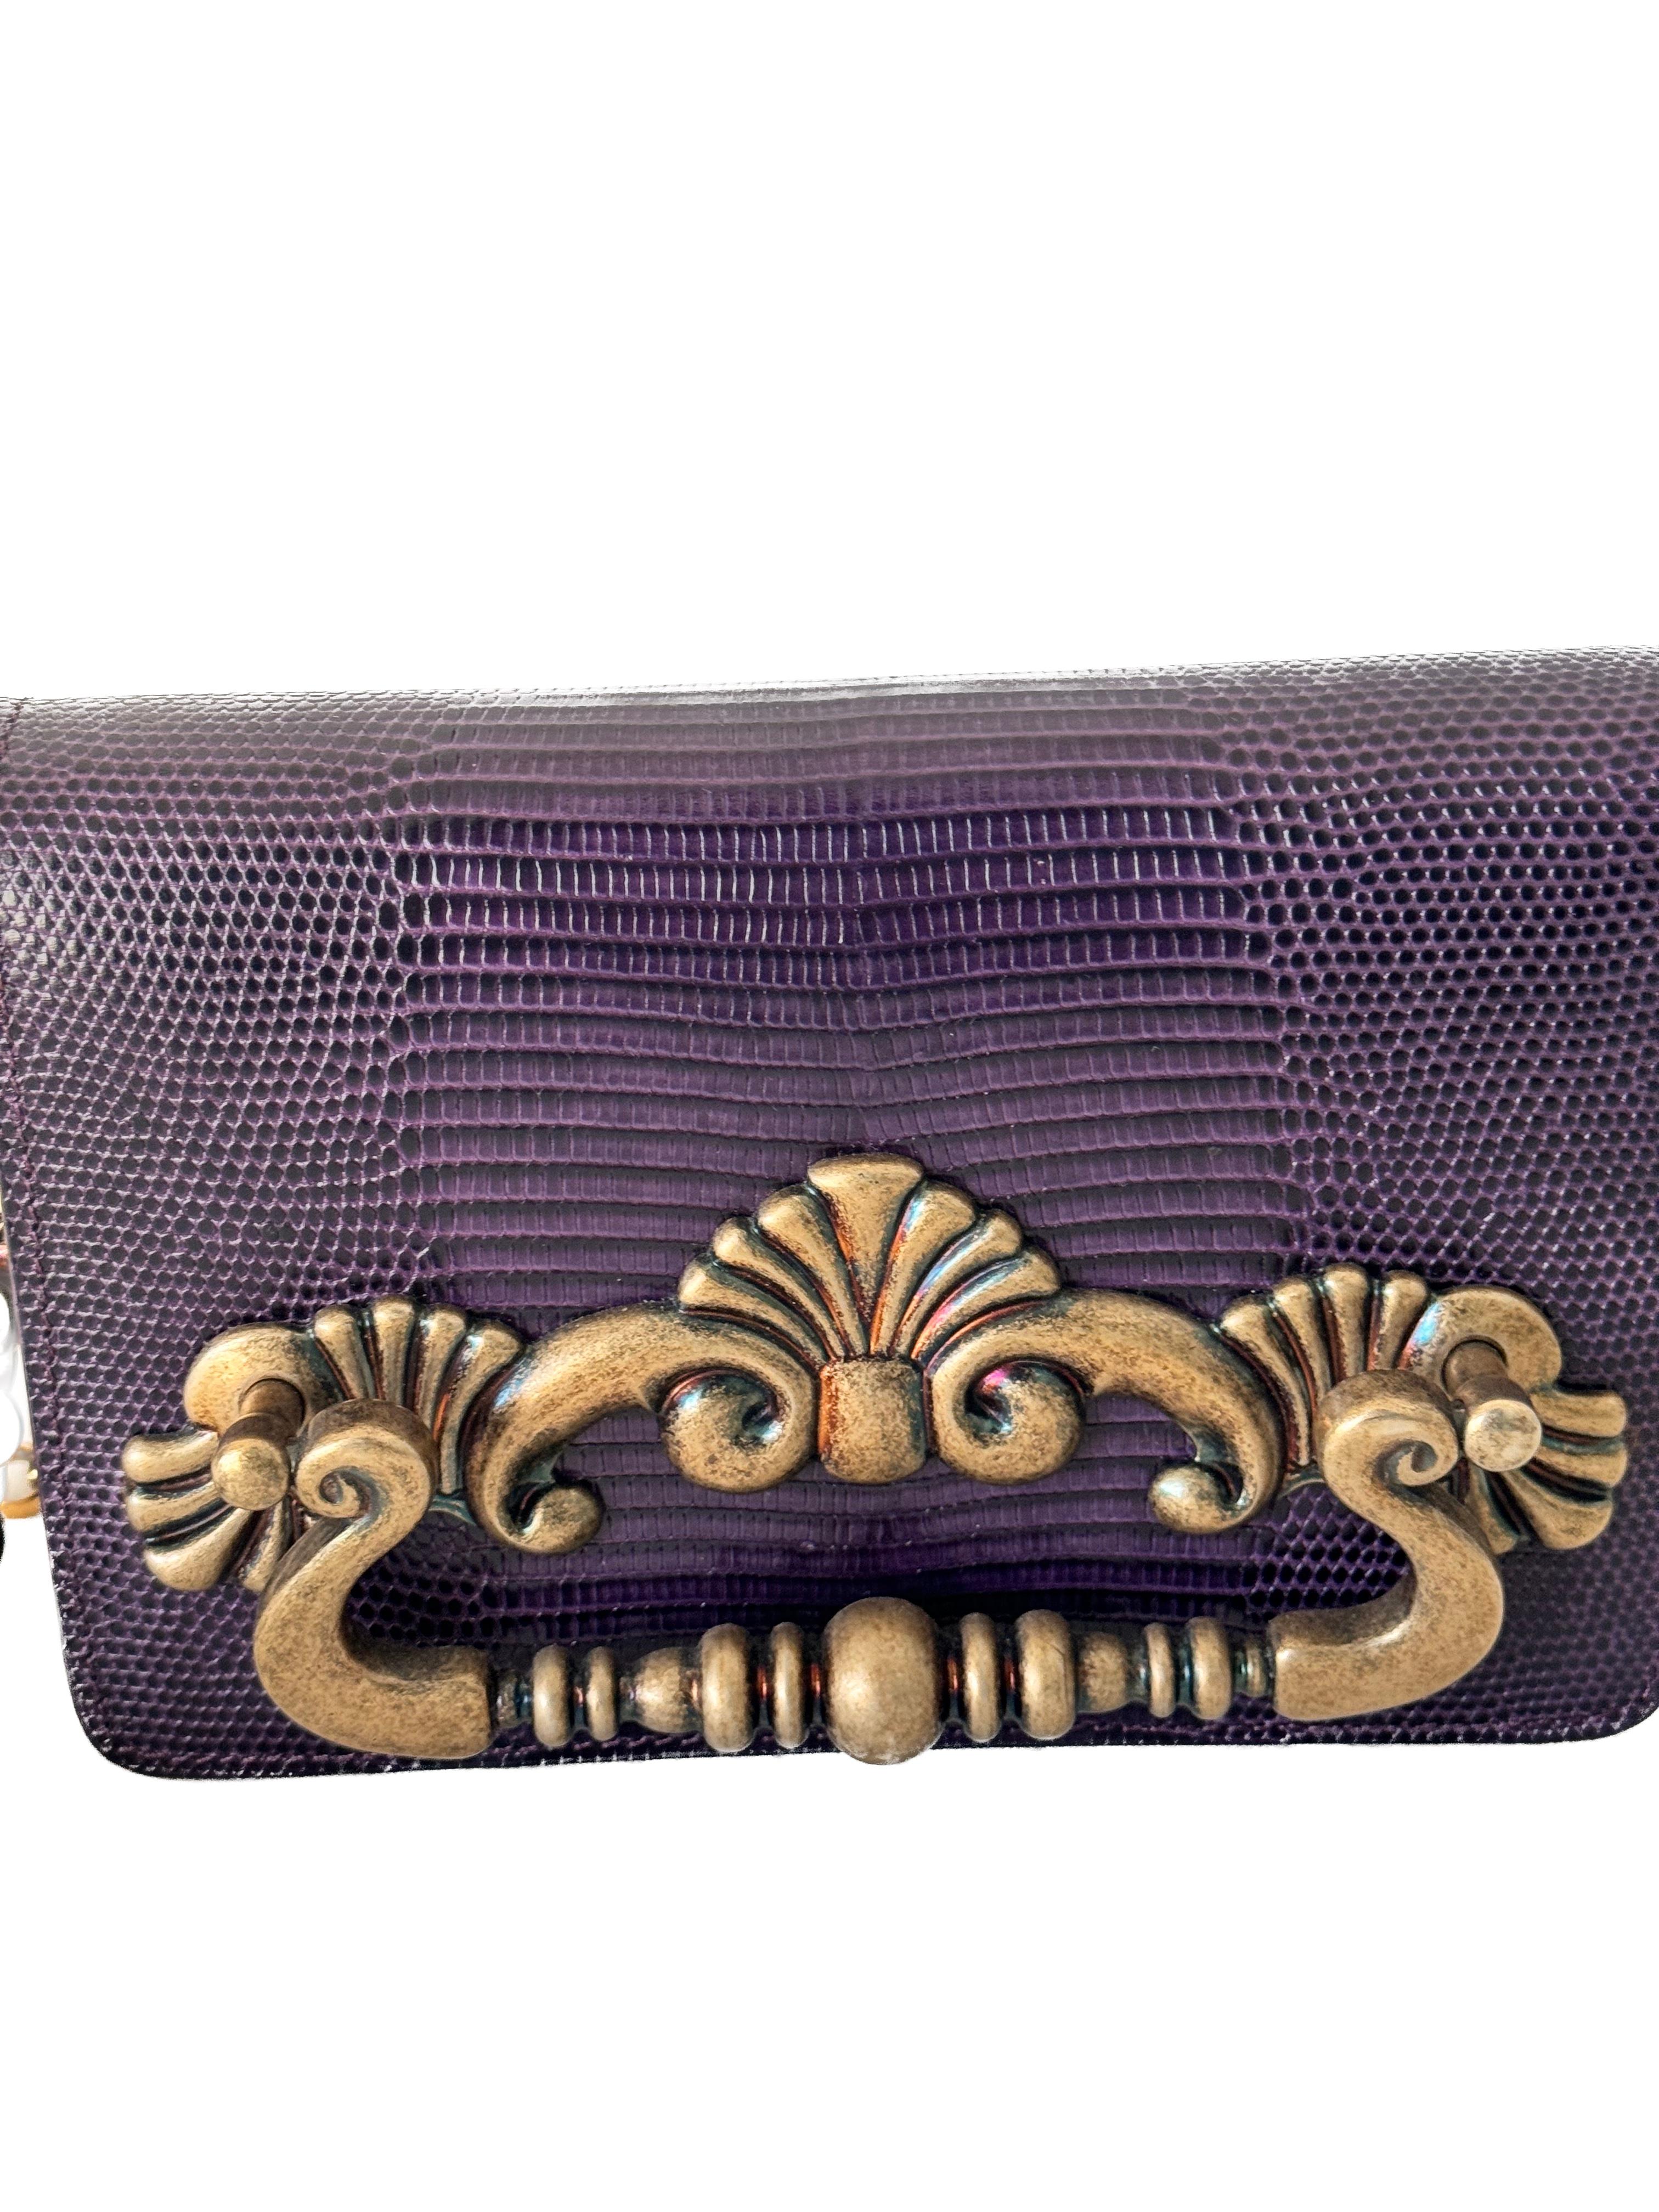 The Dolce & Gabbana Purple Lizard Evening Bag with a gold chain is an exquisite accessory that exudes luxury and sophistication. Here's an overview of this elegant piece:

Material and Color:
Crafted from luxurious lizard leather, the use of this